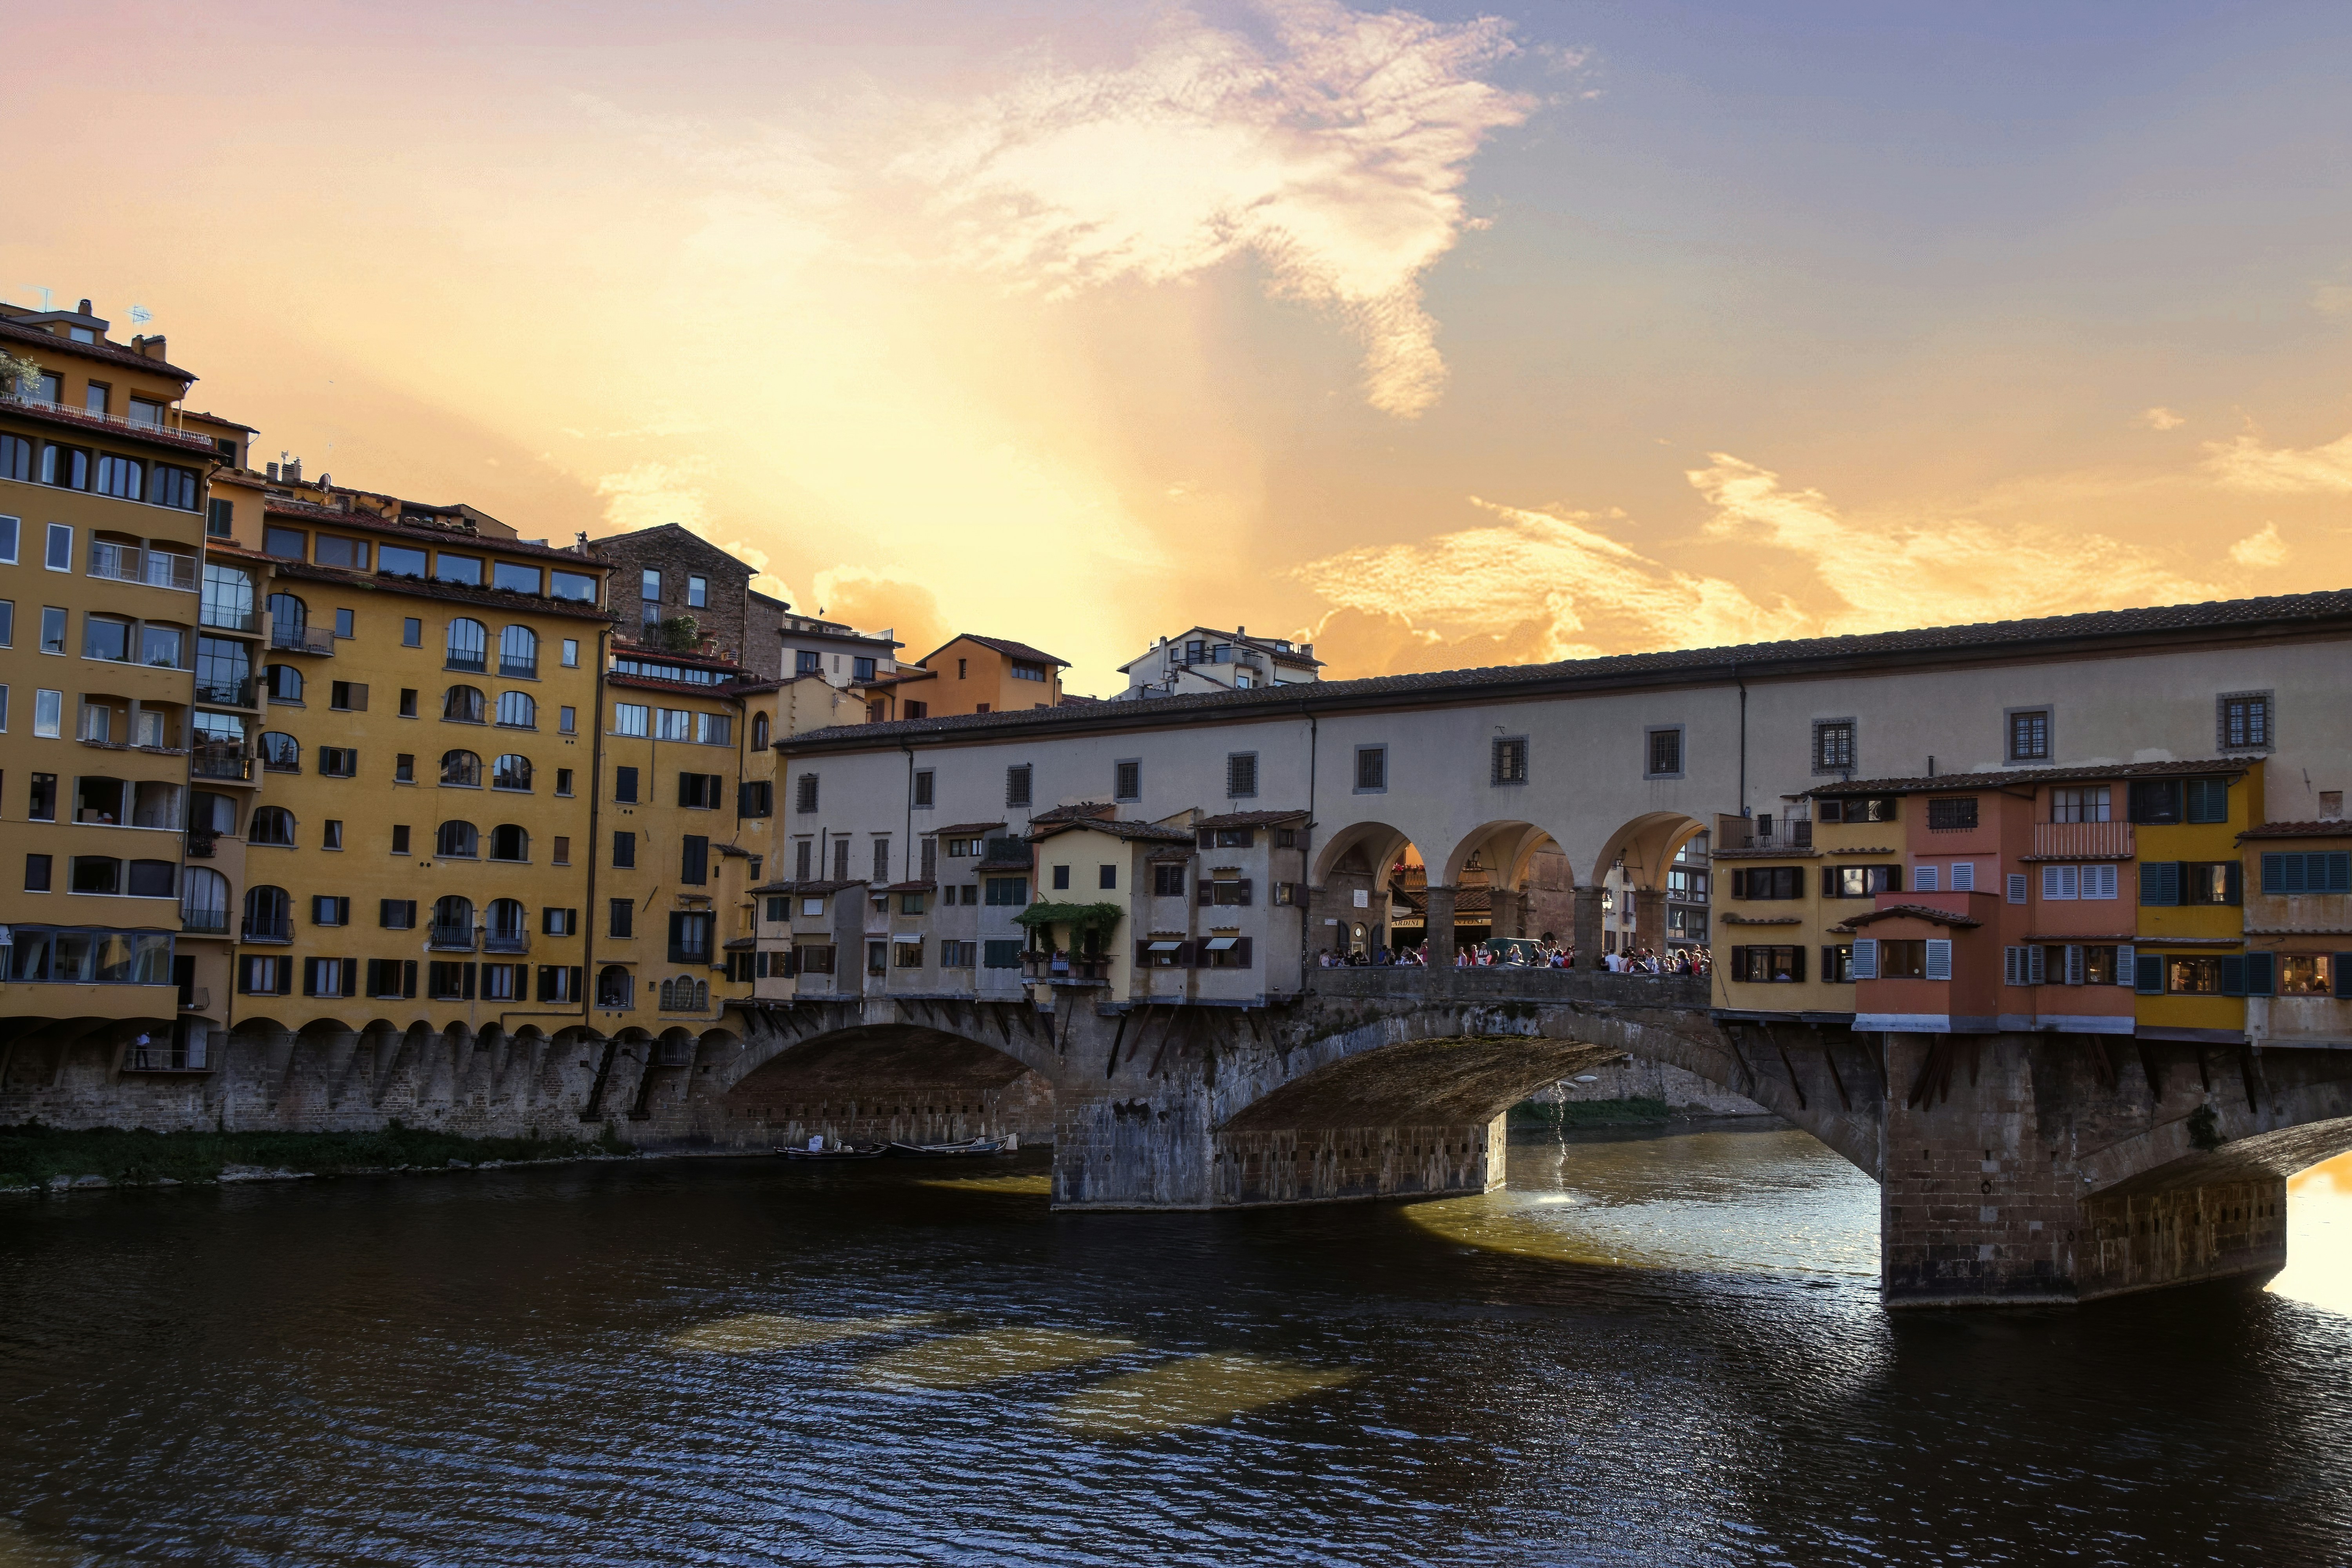 The Ponte Vecchio bridge in Florence Italy during sunset